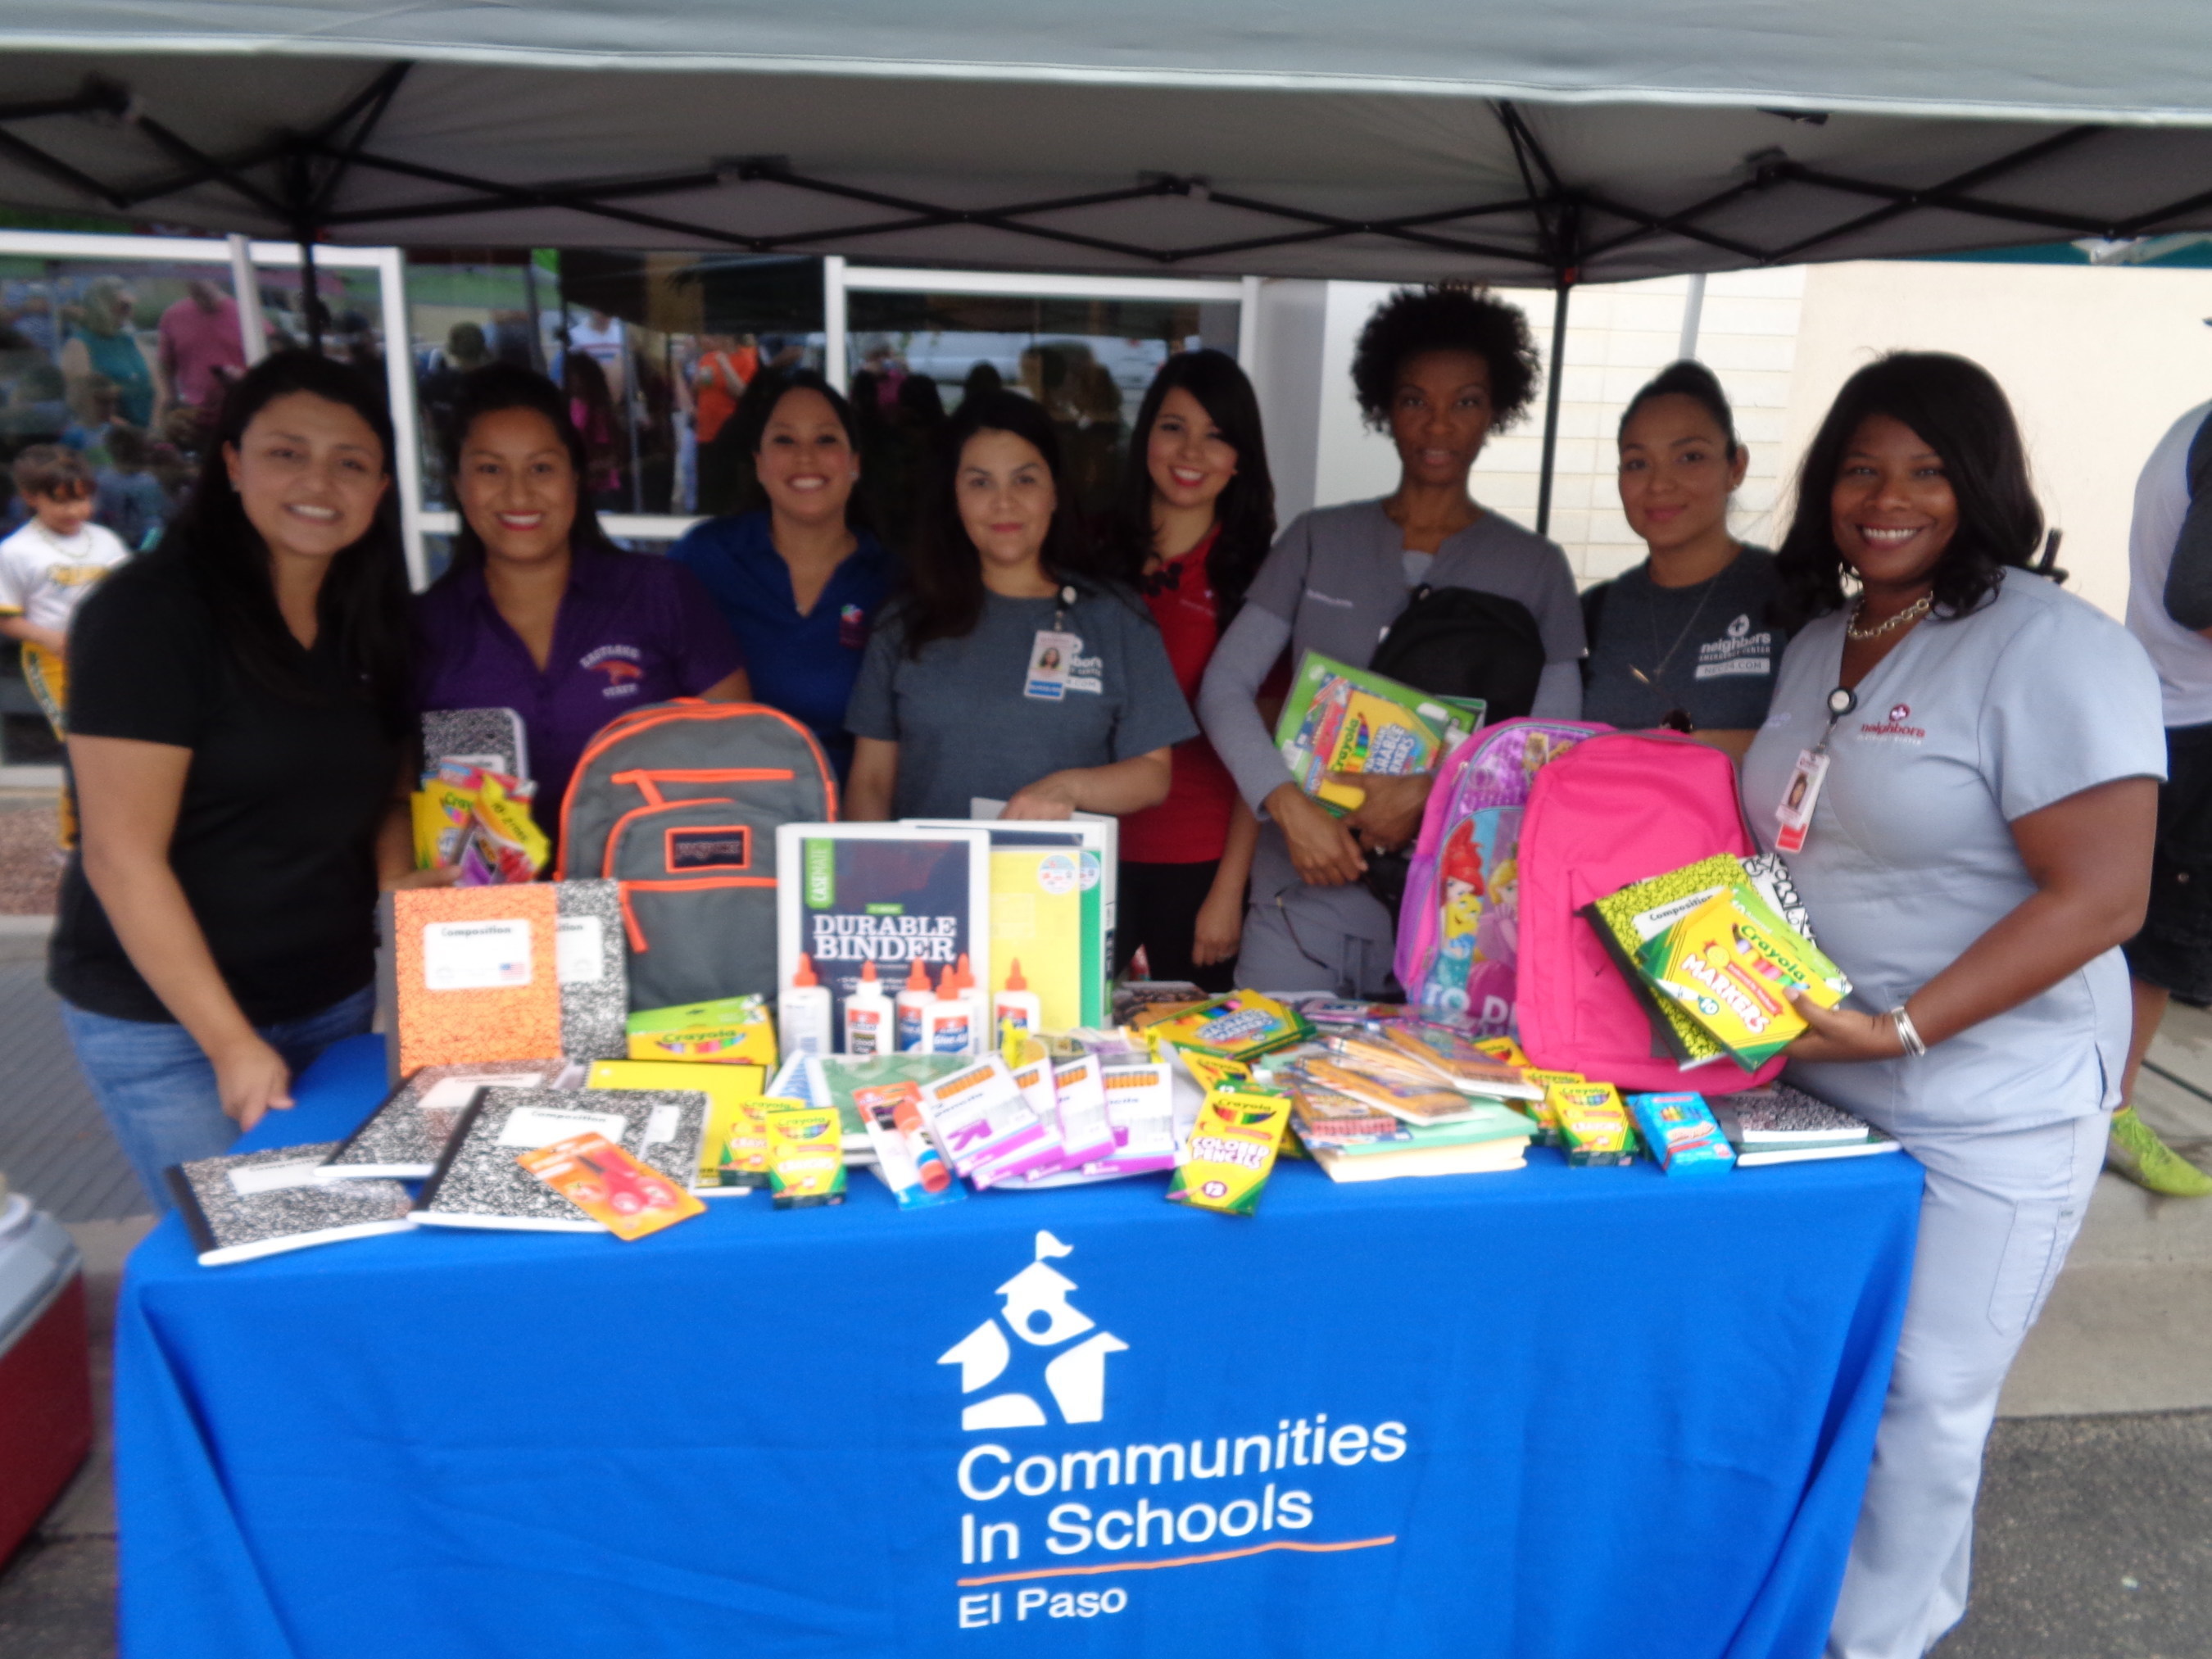 Neighbors Emergency Center in El Paso supported Communities in Schools this Fall through a drive for school supplies.